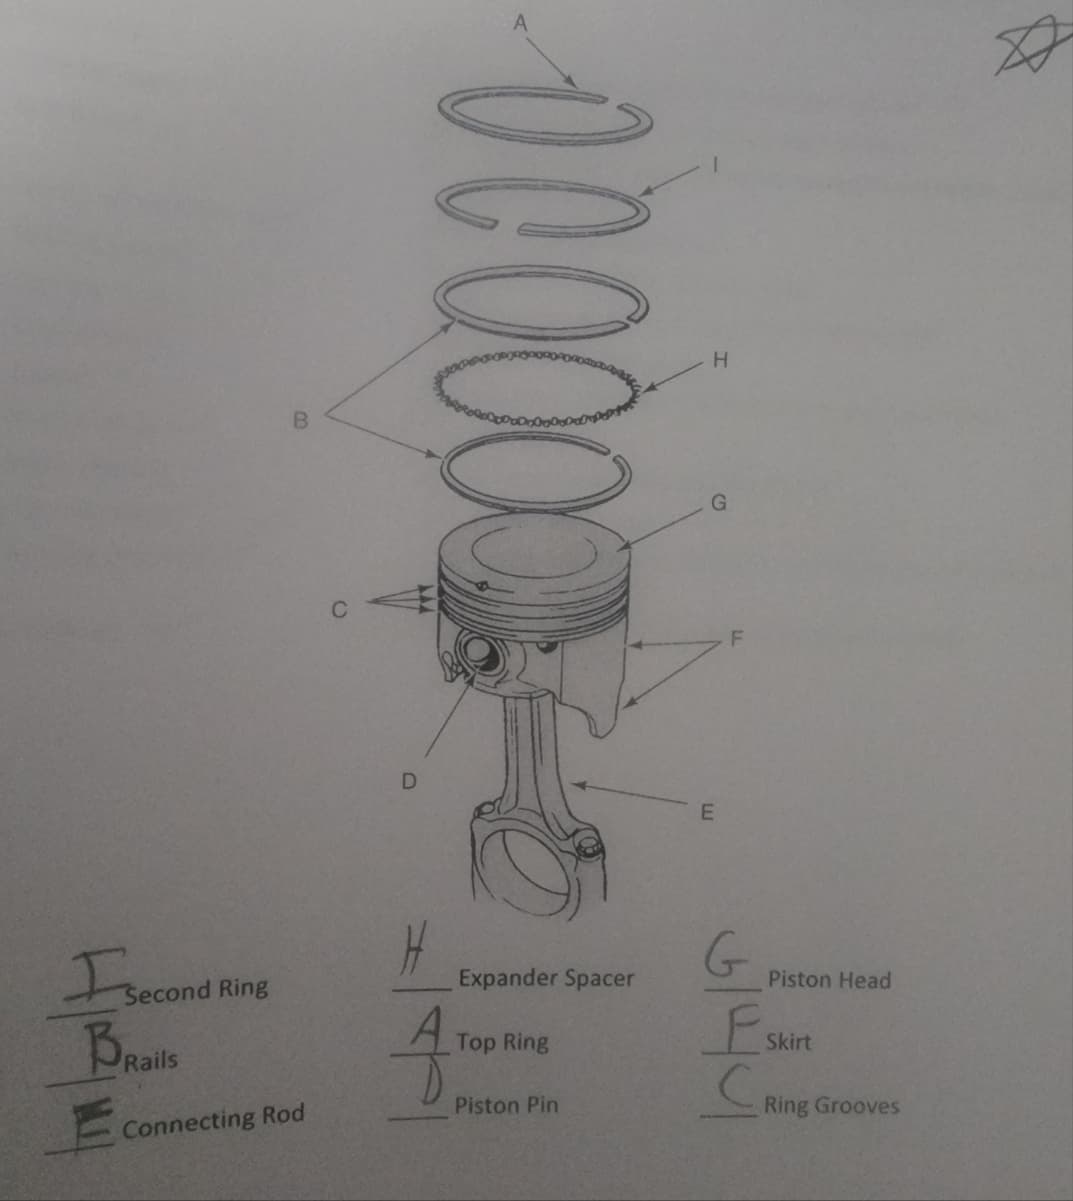 F
second Ring
G.
Expander Spacer
Piston Head
BRails
Top Ring
Skirt
Piston Pin
Ring Grooves
Connecting Rod
